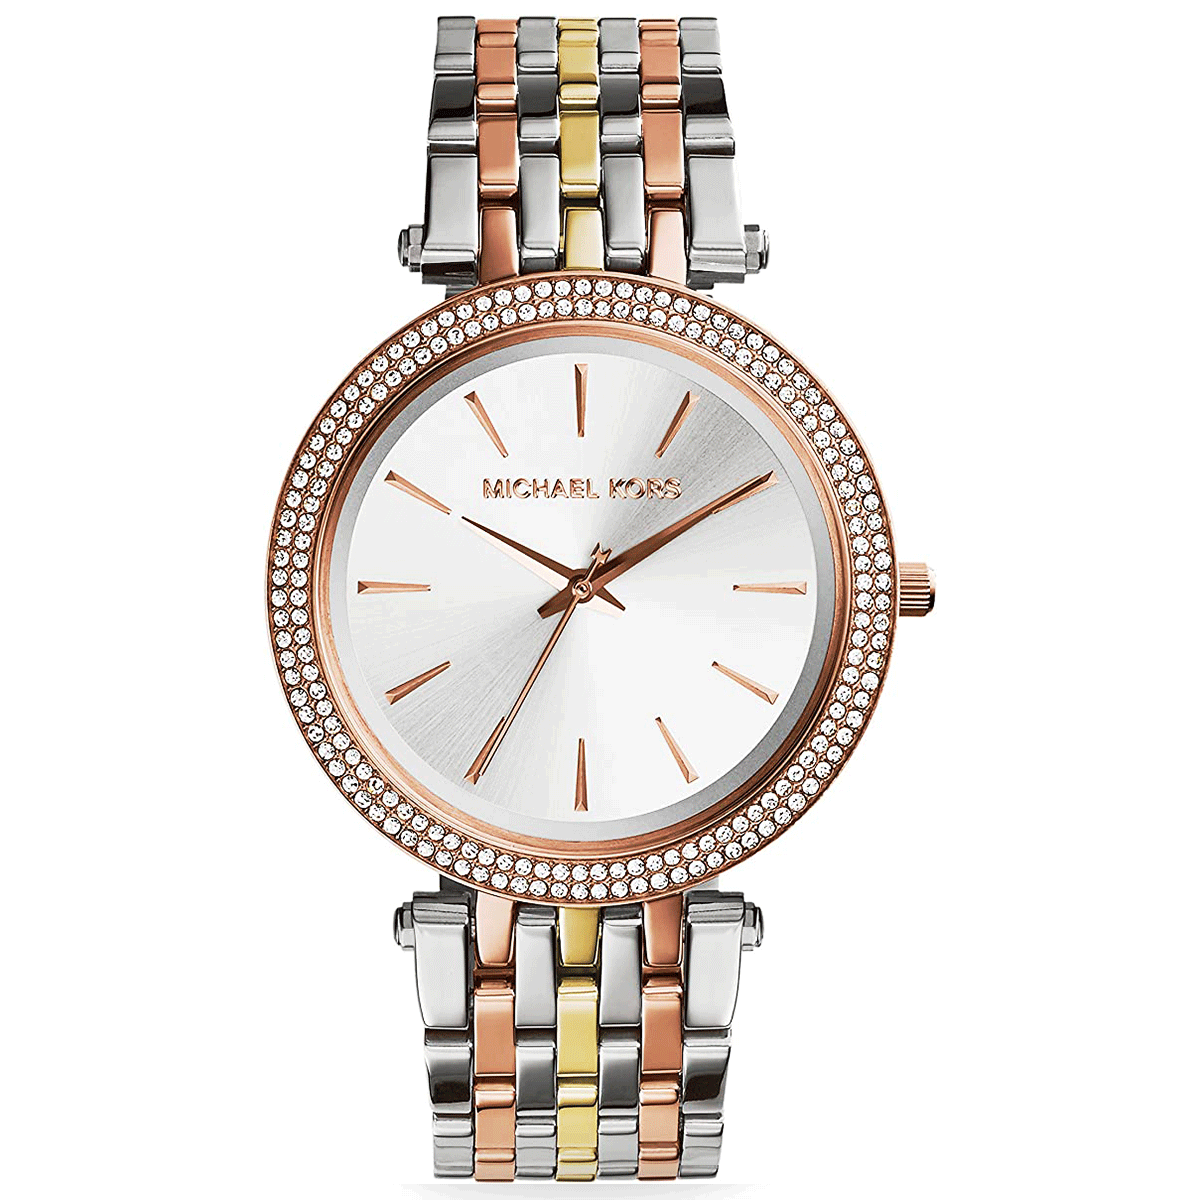 Michael kors Darci women watch silver with rose gold